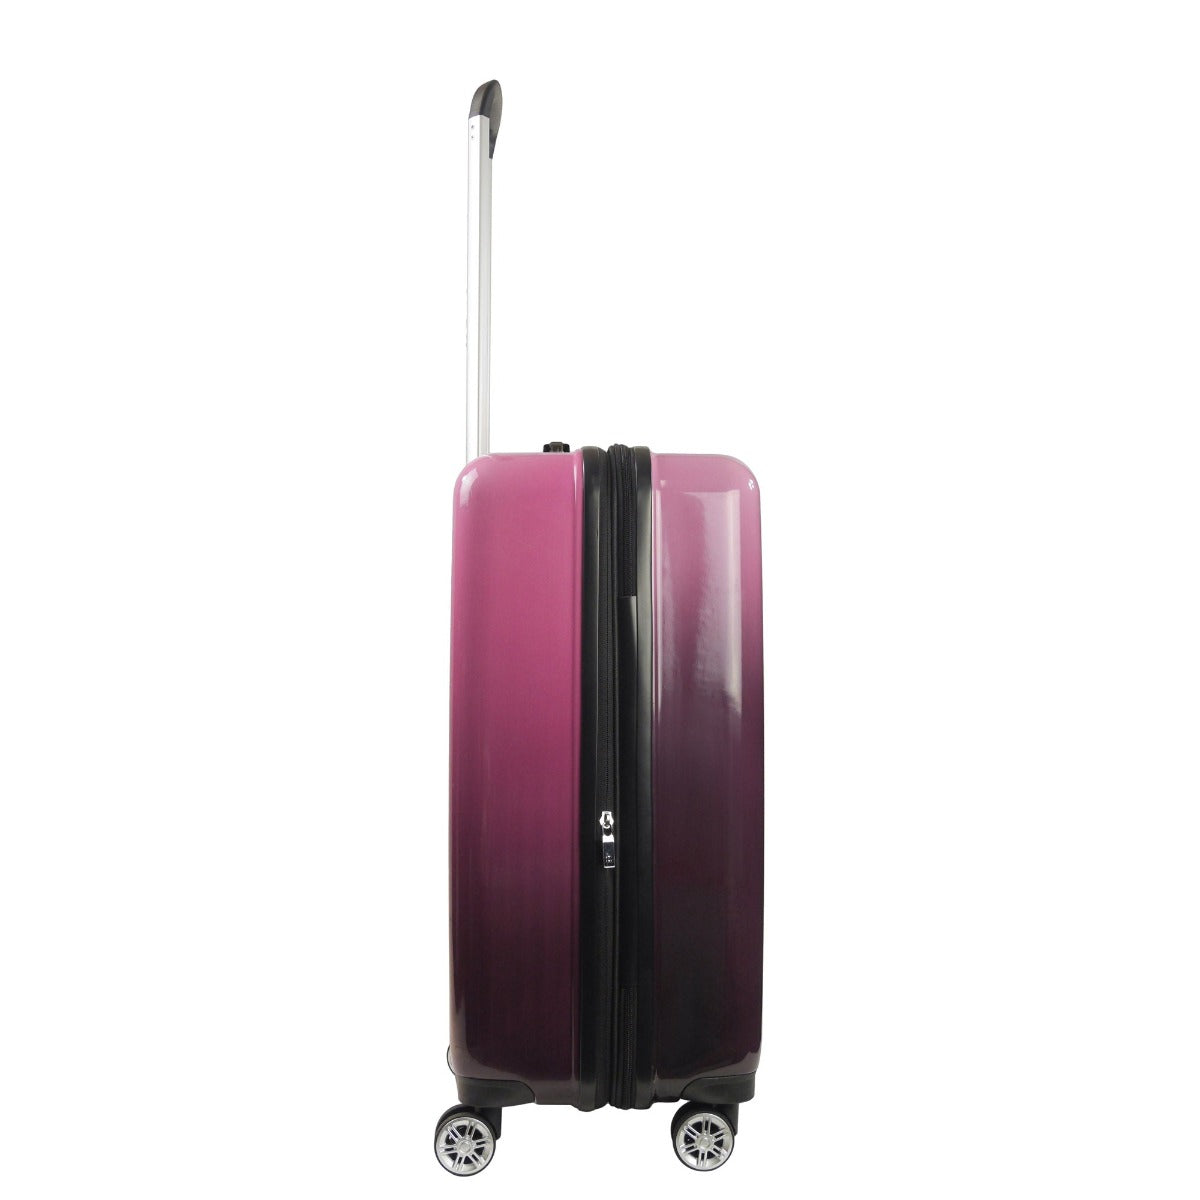 Ful Impulse Ombre Hardside Spinner Suitcase 26 inch Luggage Pink